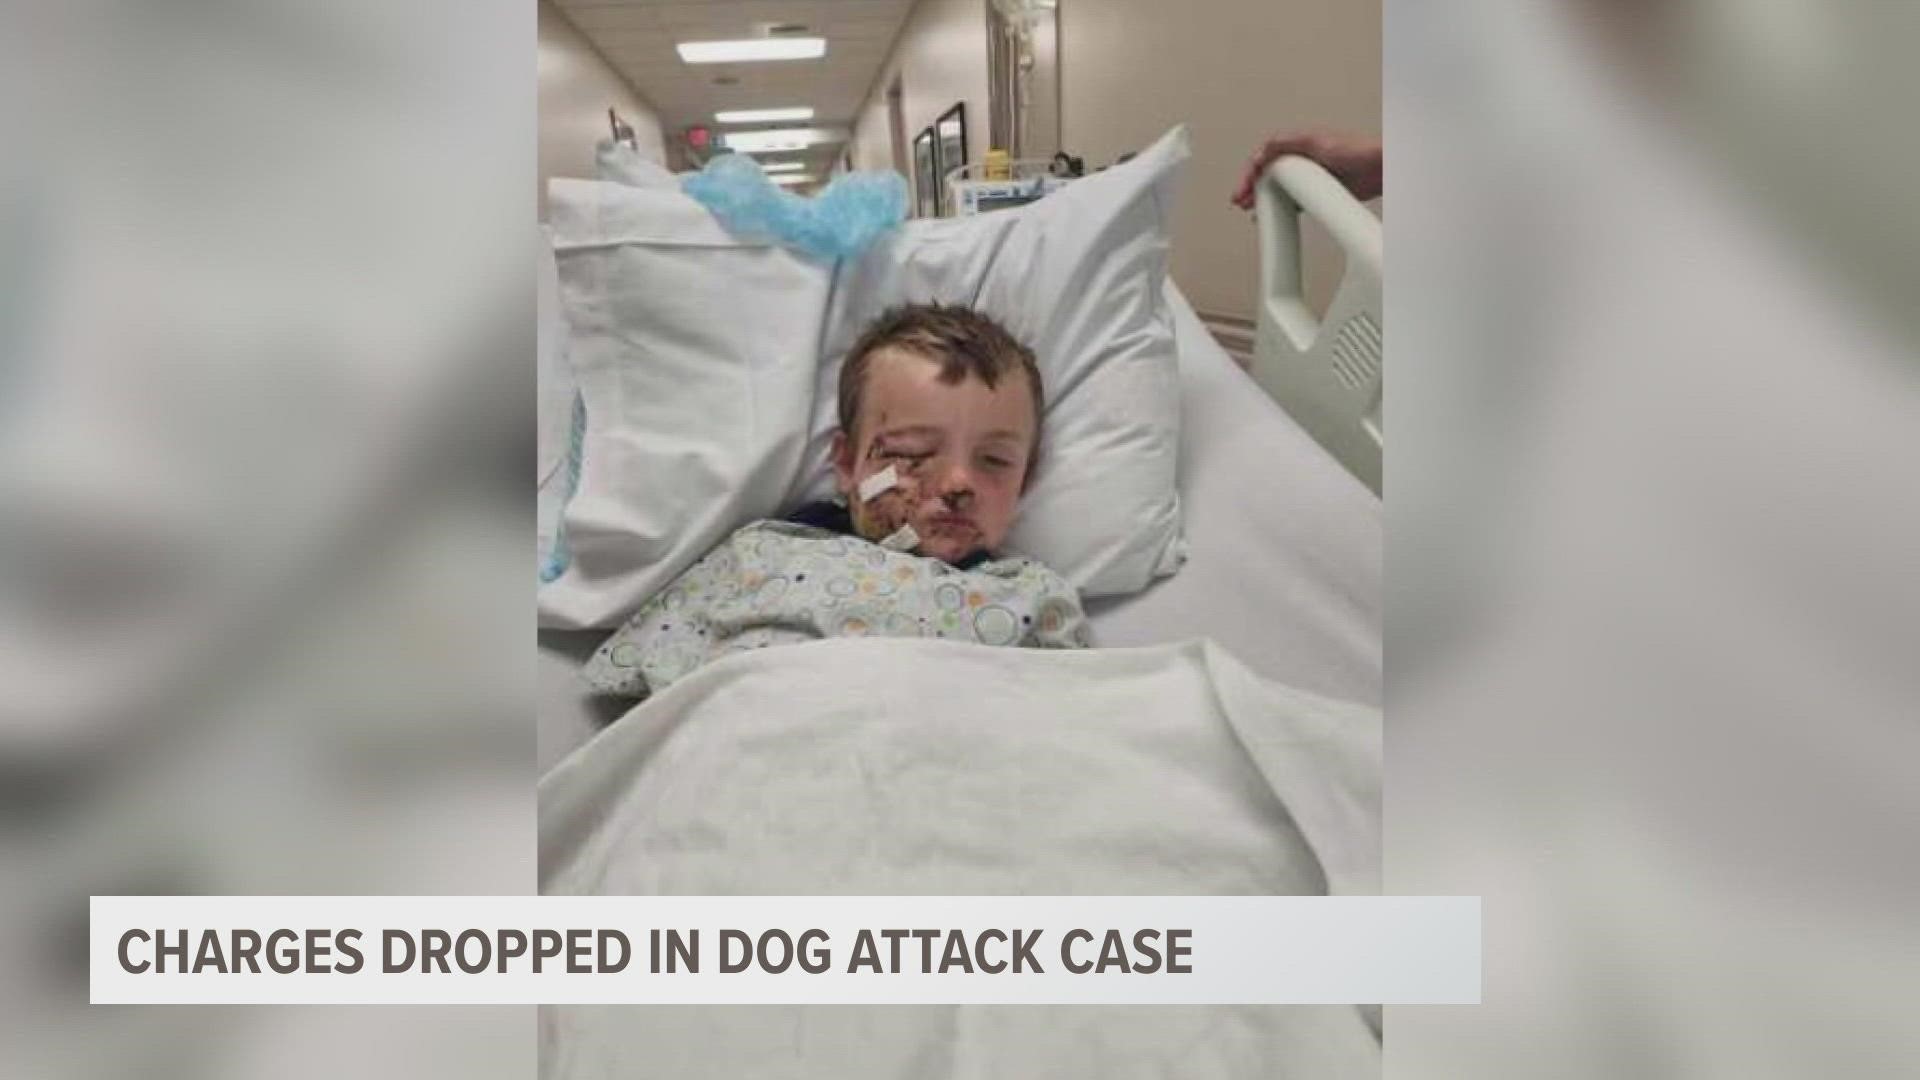 The prosecutor's office says there is no evidence in the case to prove the dog's owner knew his dogs were "dangerous animals," so she's dropping the charges.